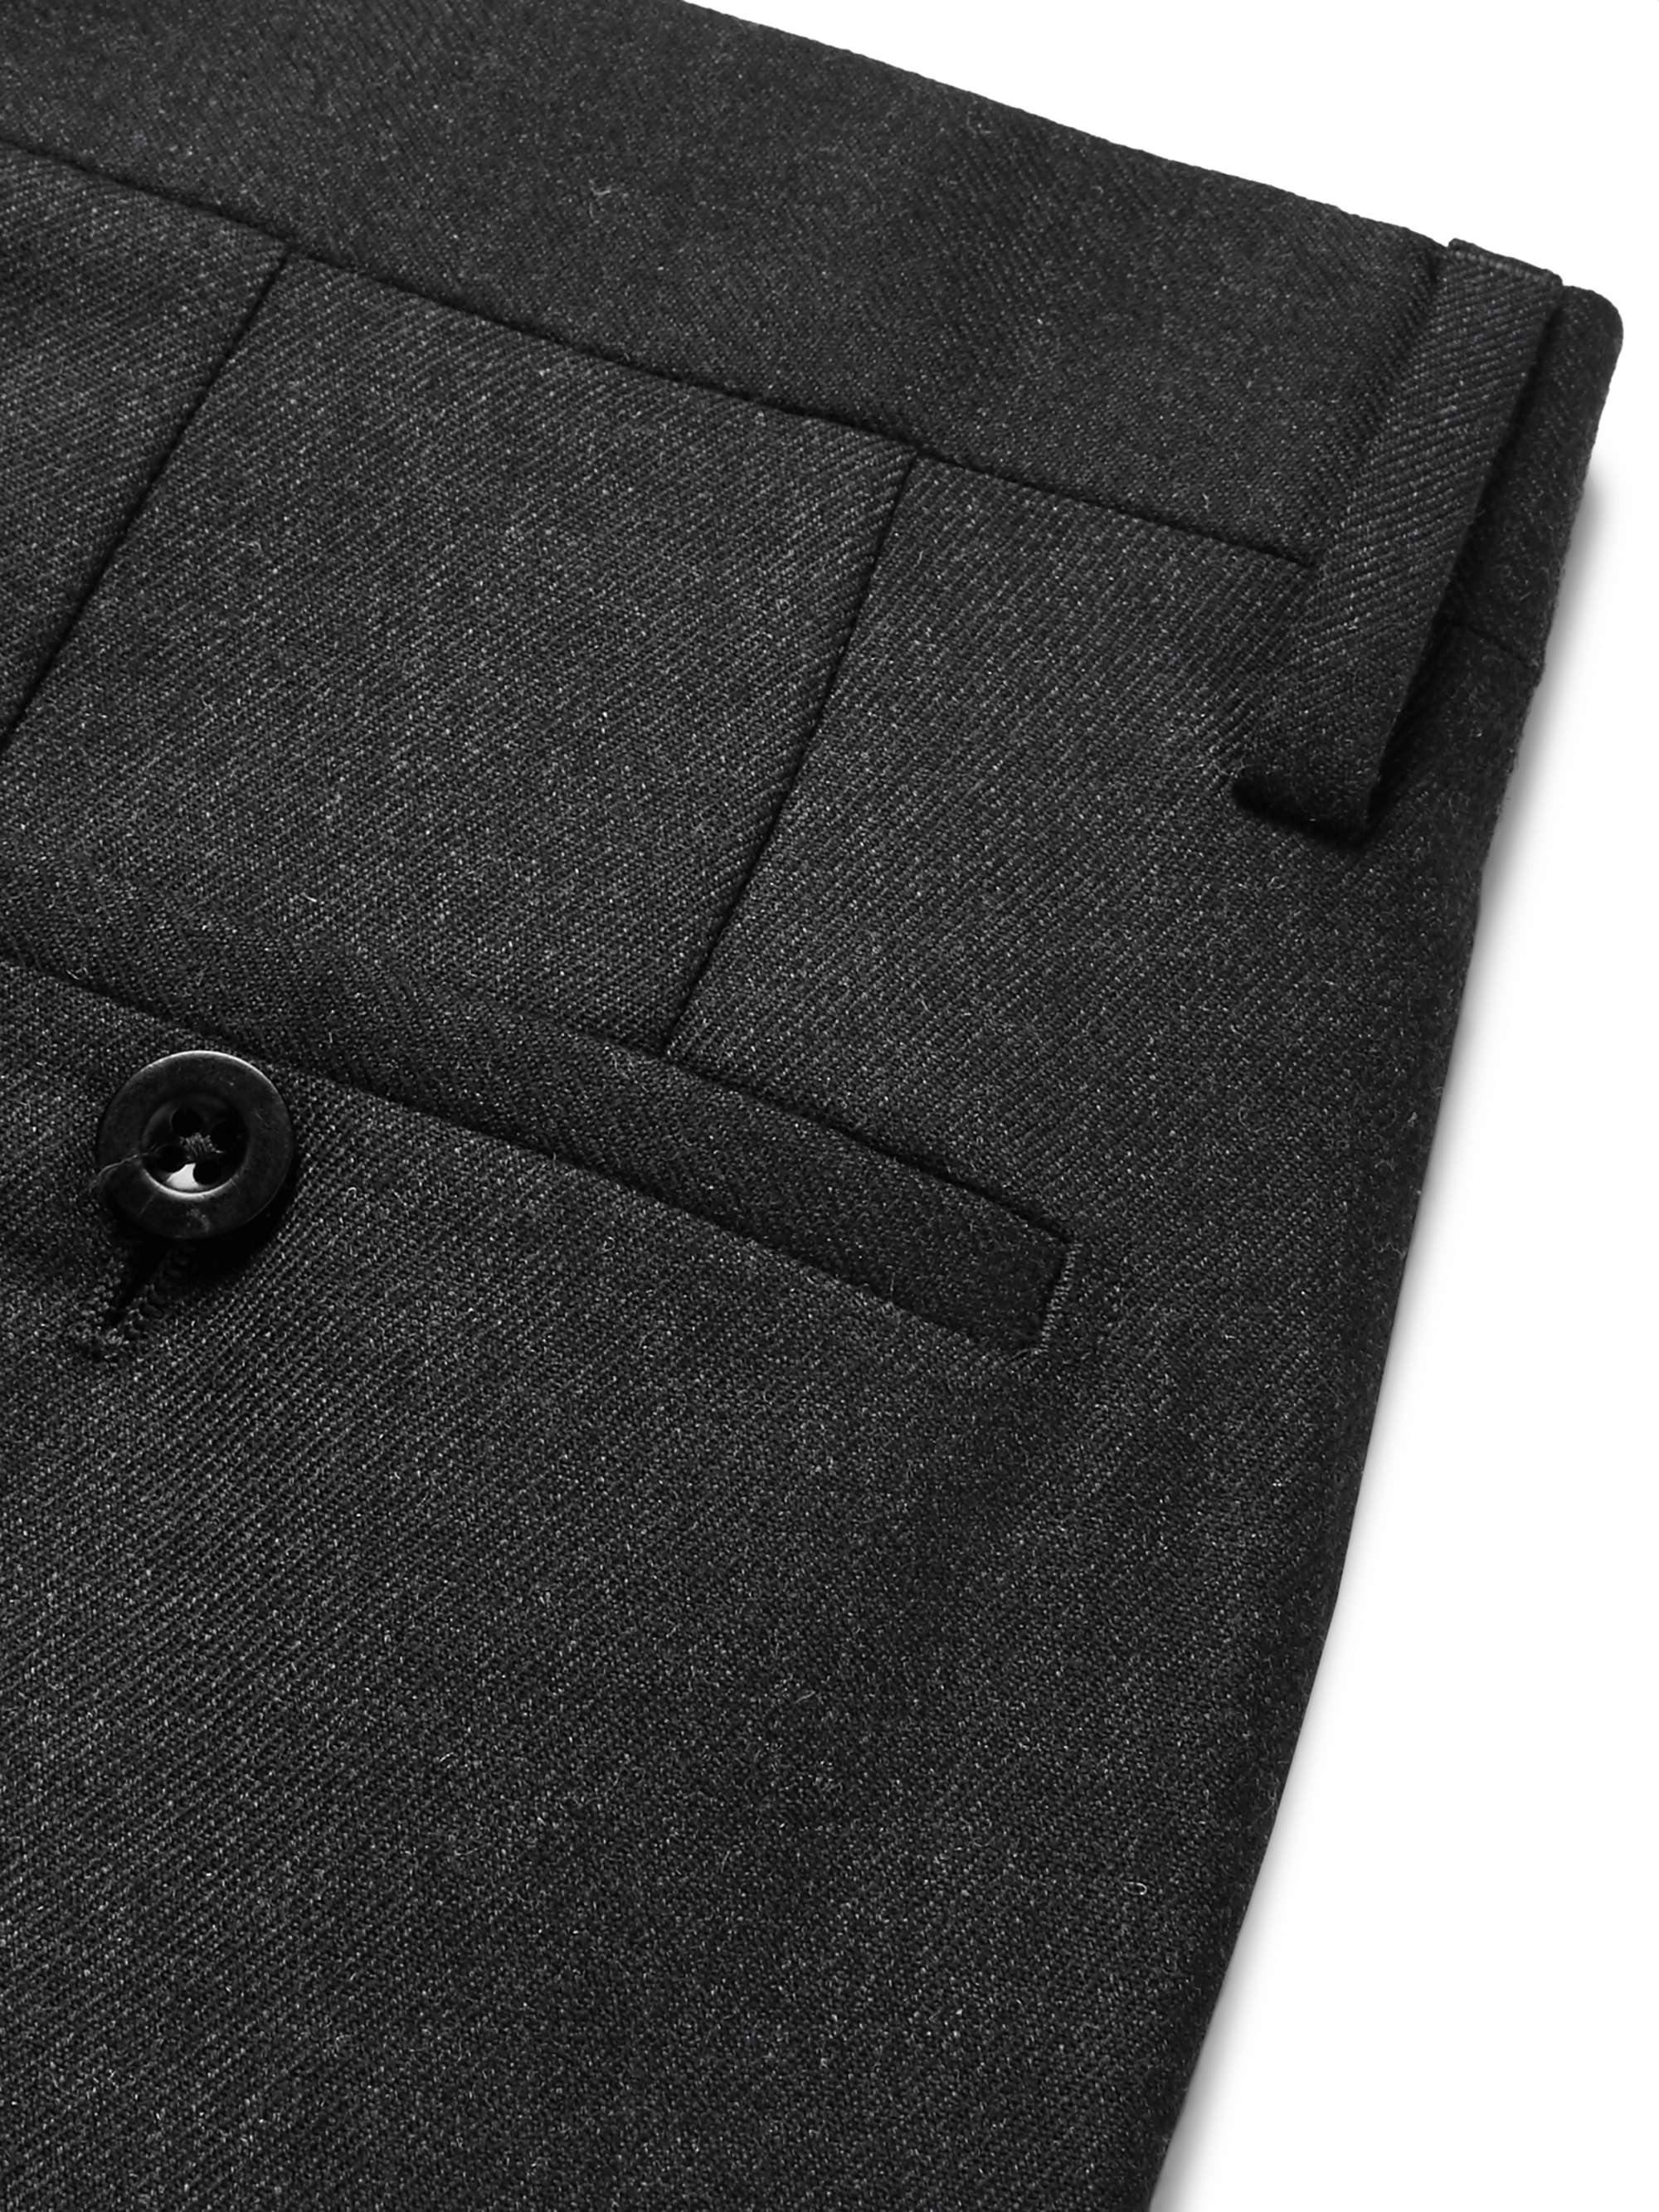 MR P. Slim-Fit Grey Worsted Wool Trousers